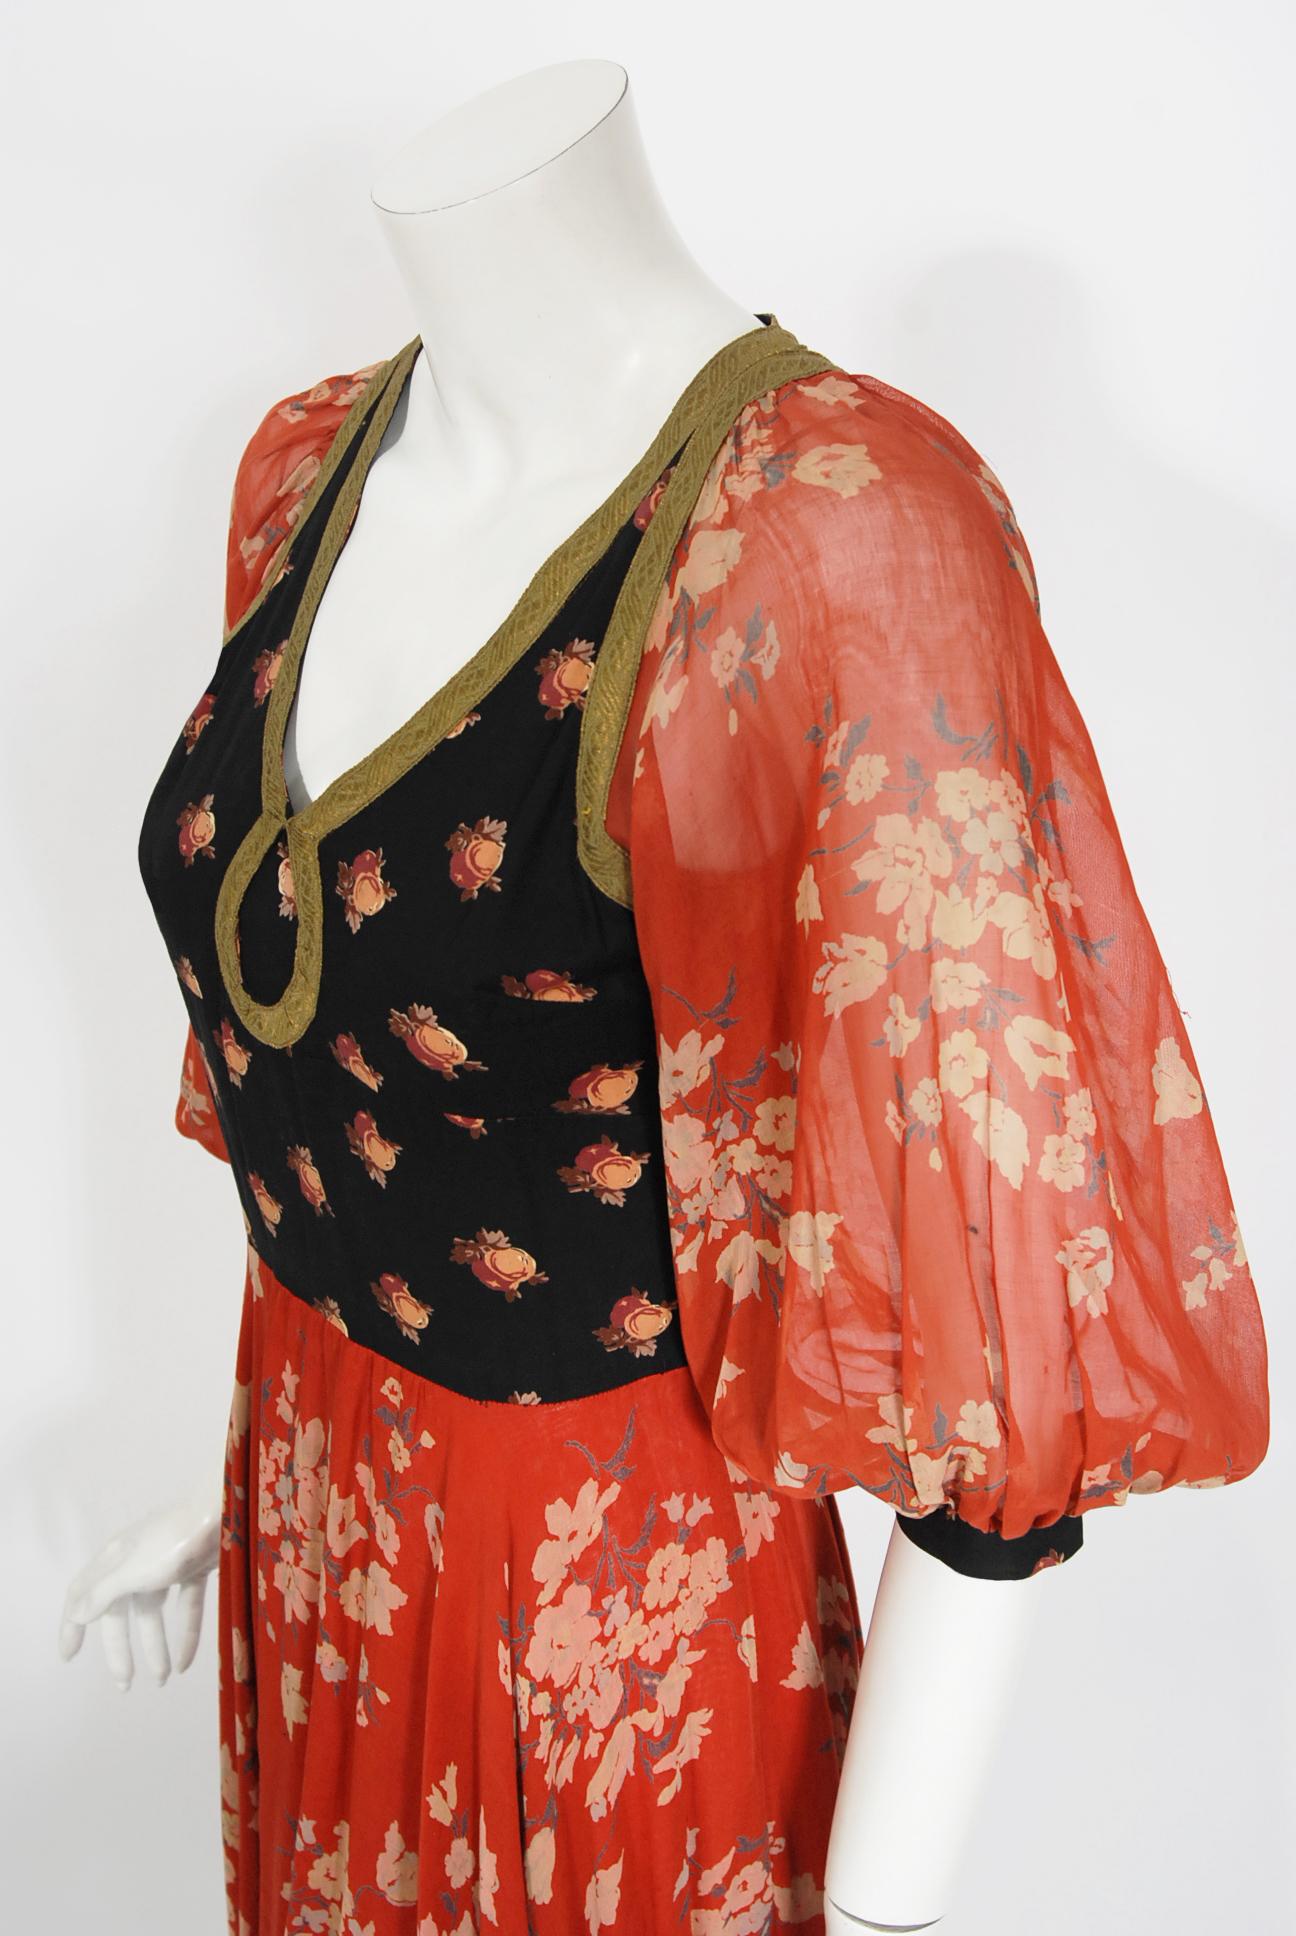 Vintage 1971 Thea Porter Documented Black & Red Floral Print Cotton Gypsy Dress  2